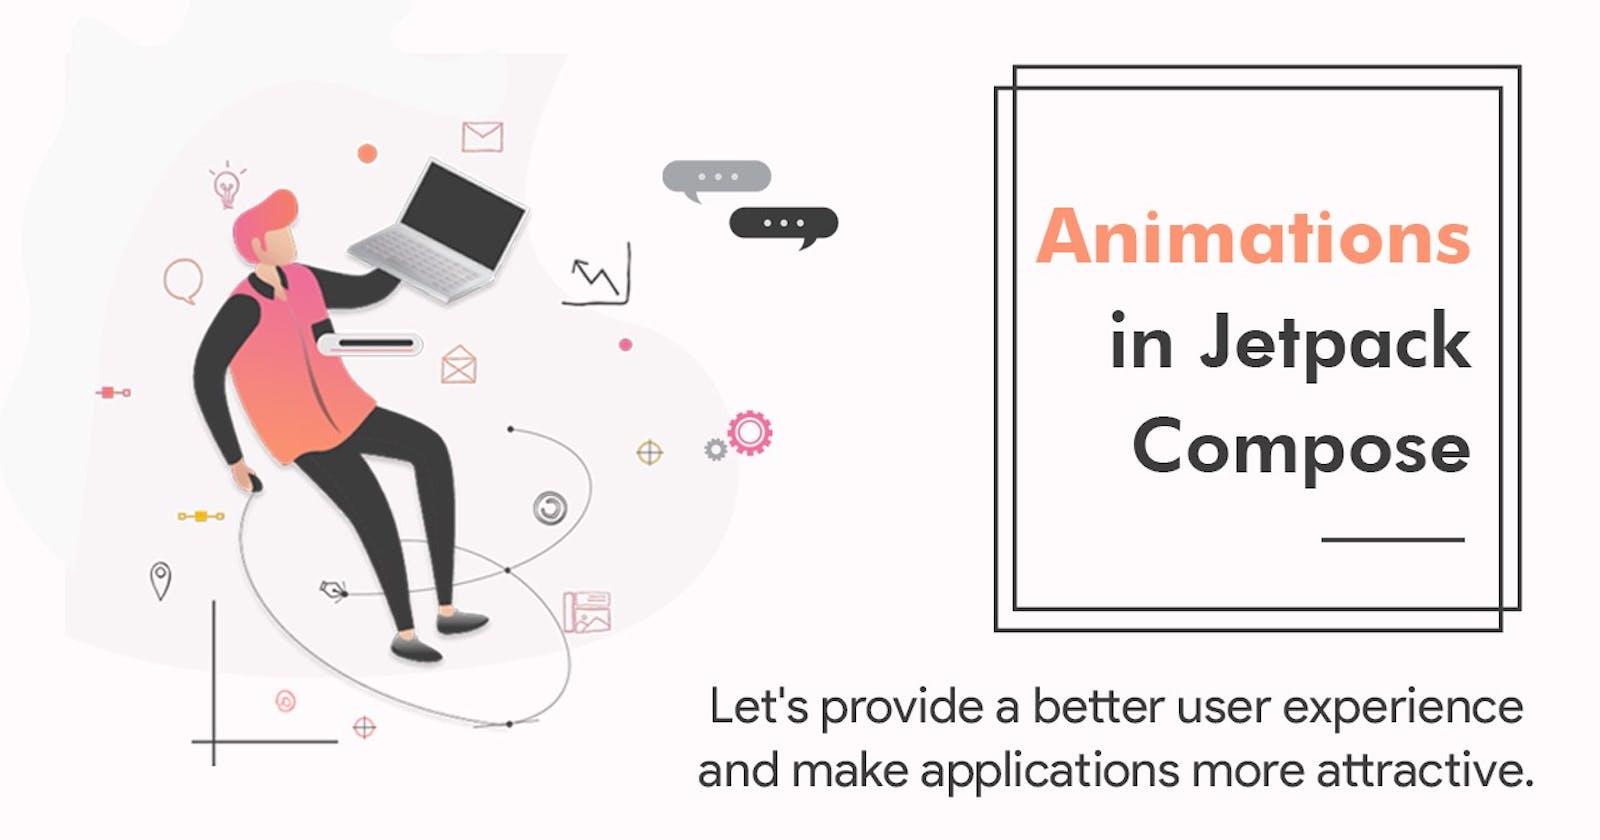 Animations in Jetpack Compose with examples